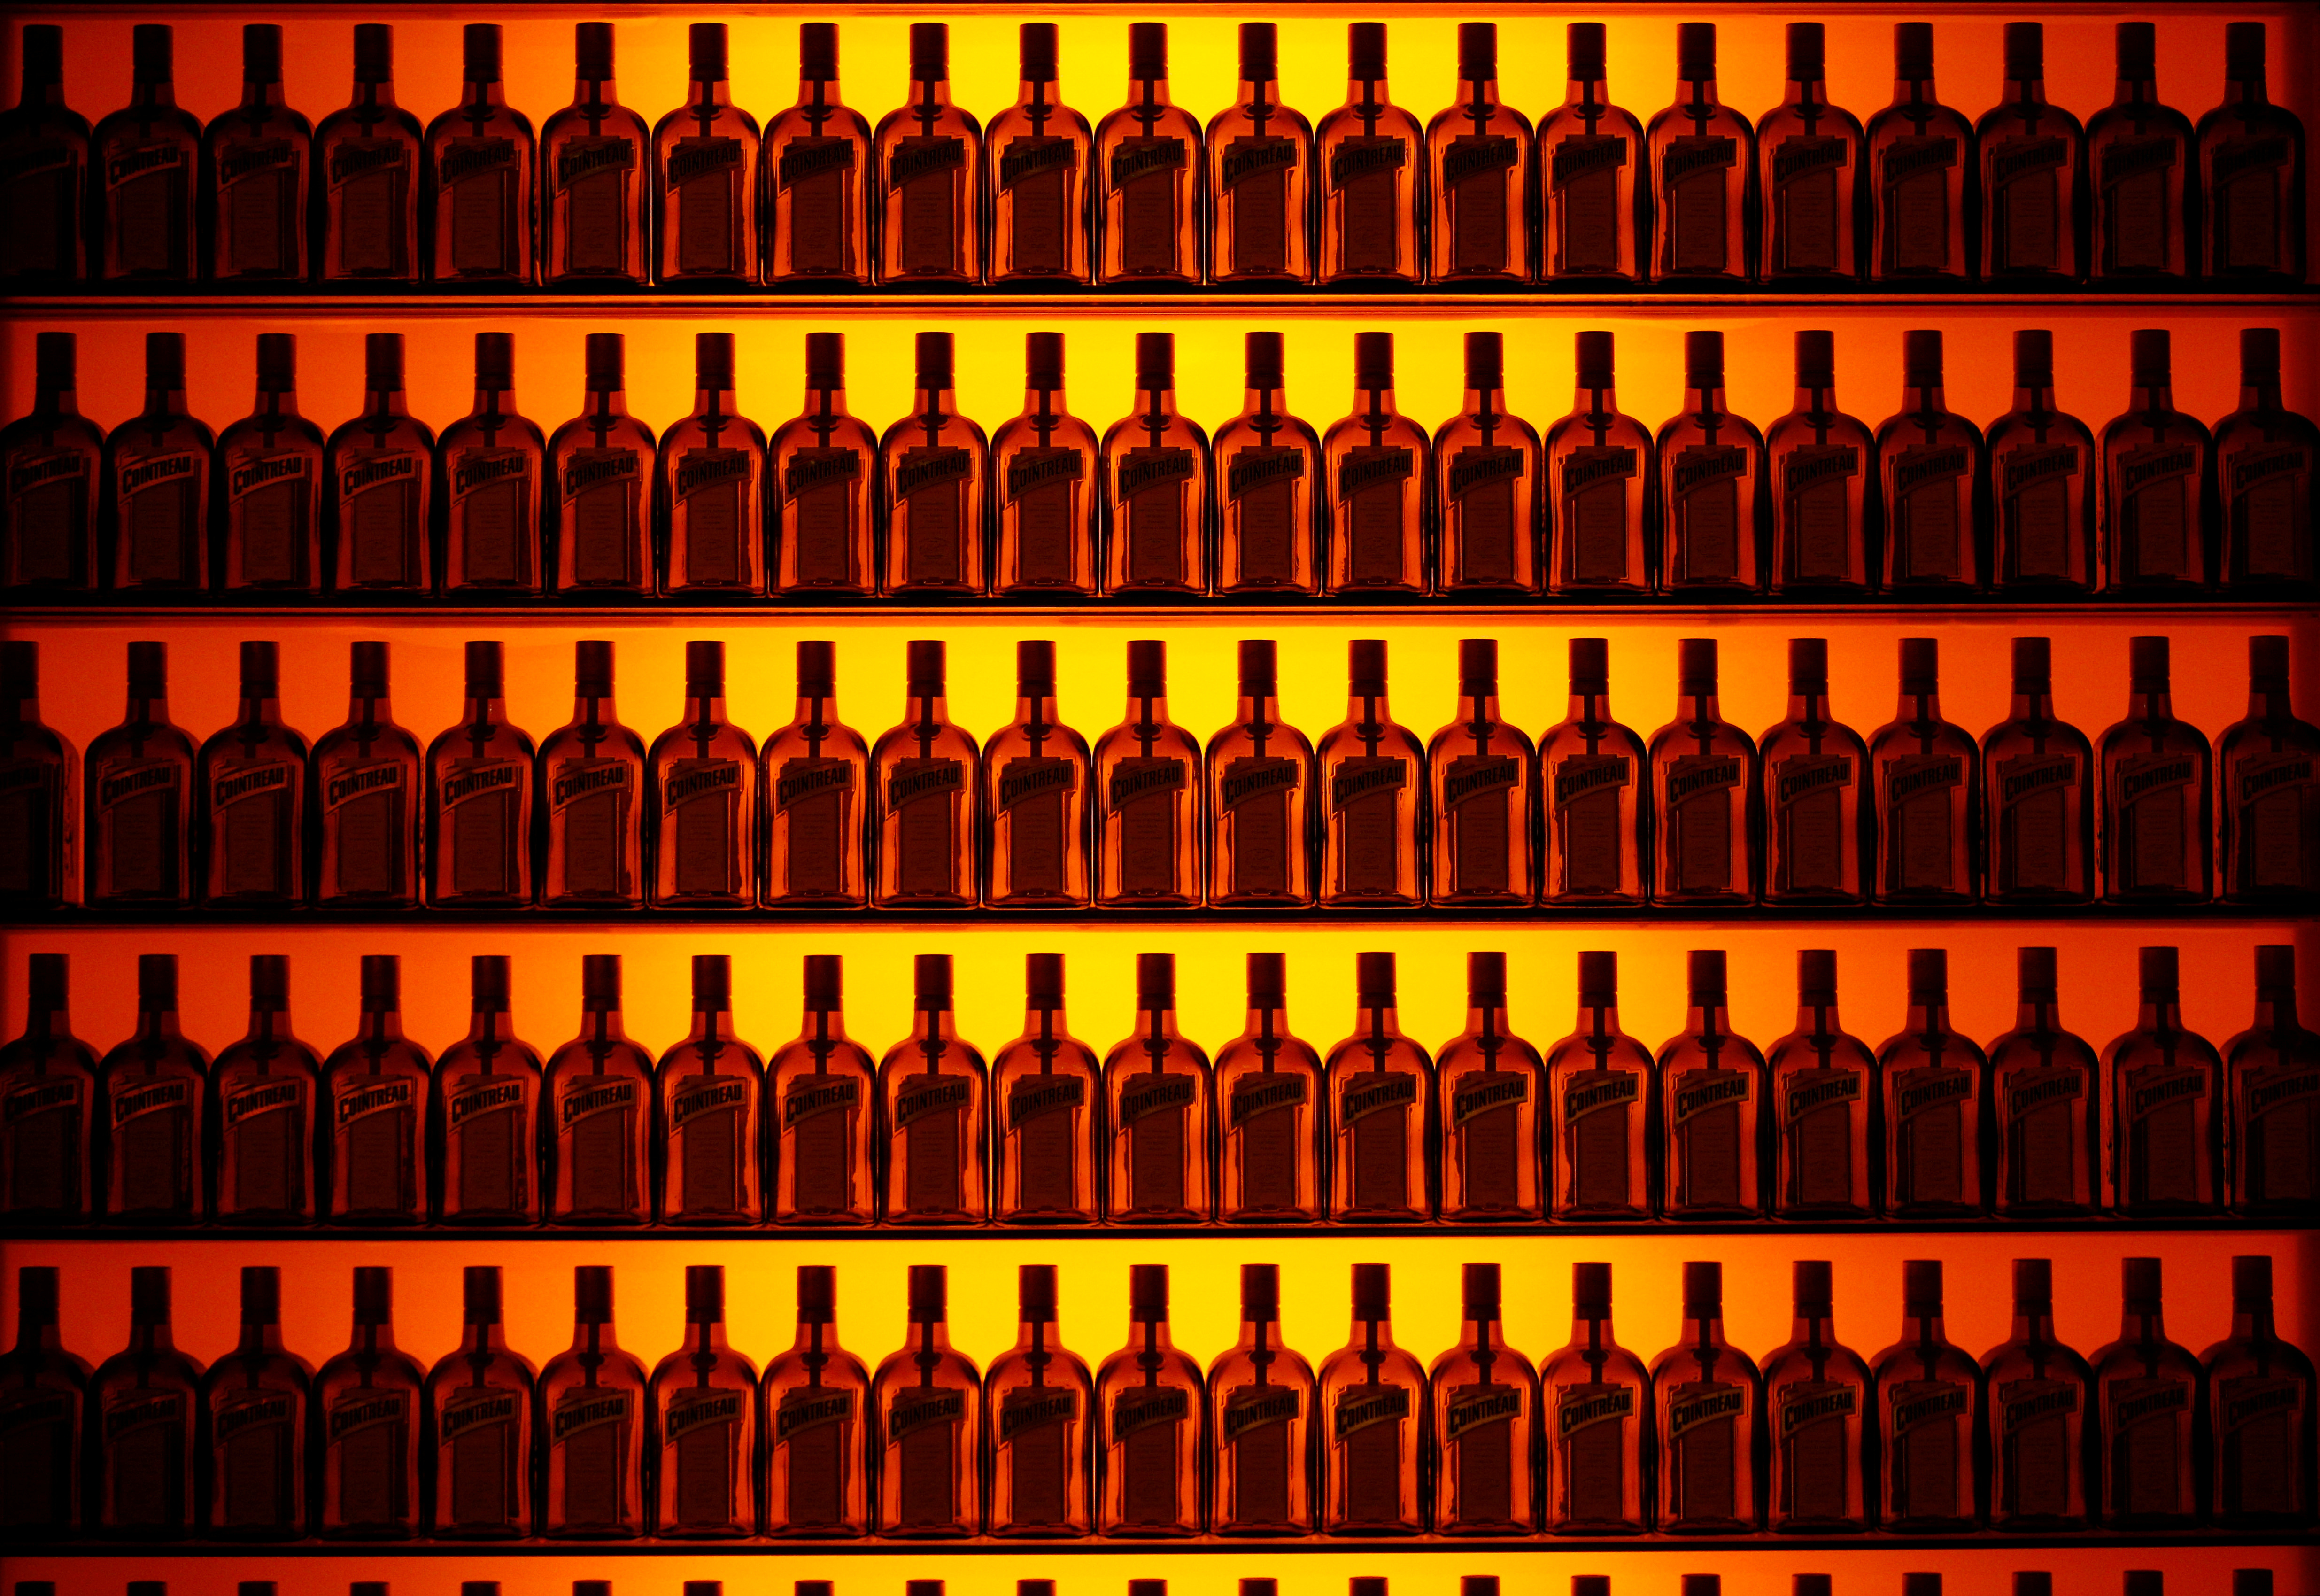 Bottles of Cointreau are displayed at the Carre Cointreau in the Cointreau distillery in Saint-Barthelemy-d'Anjou near Angers